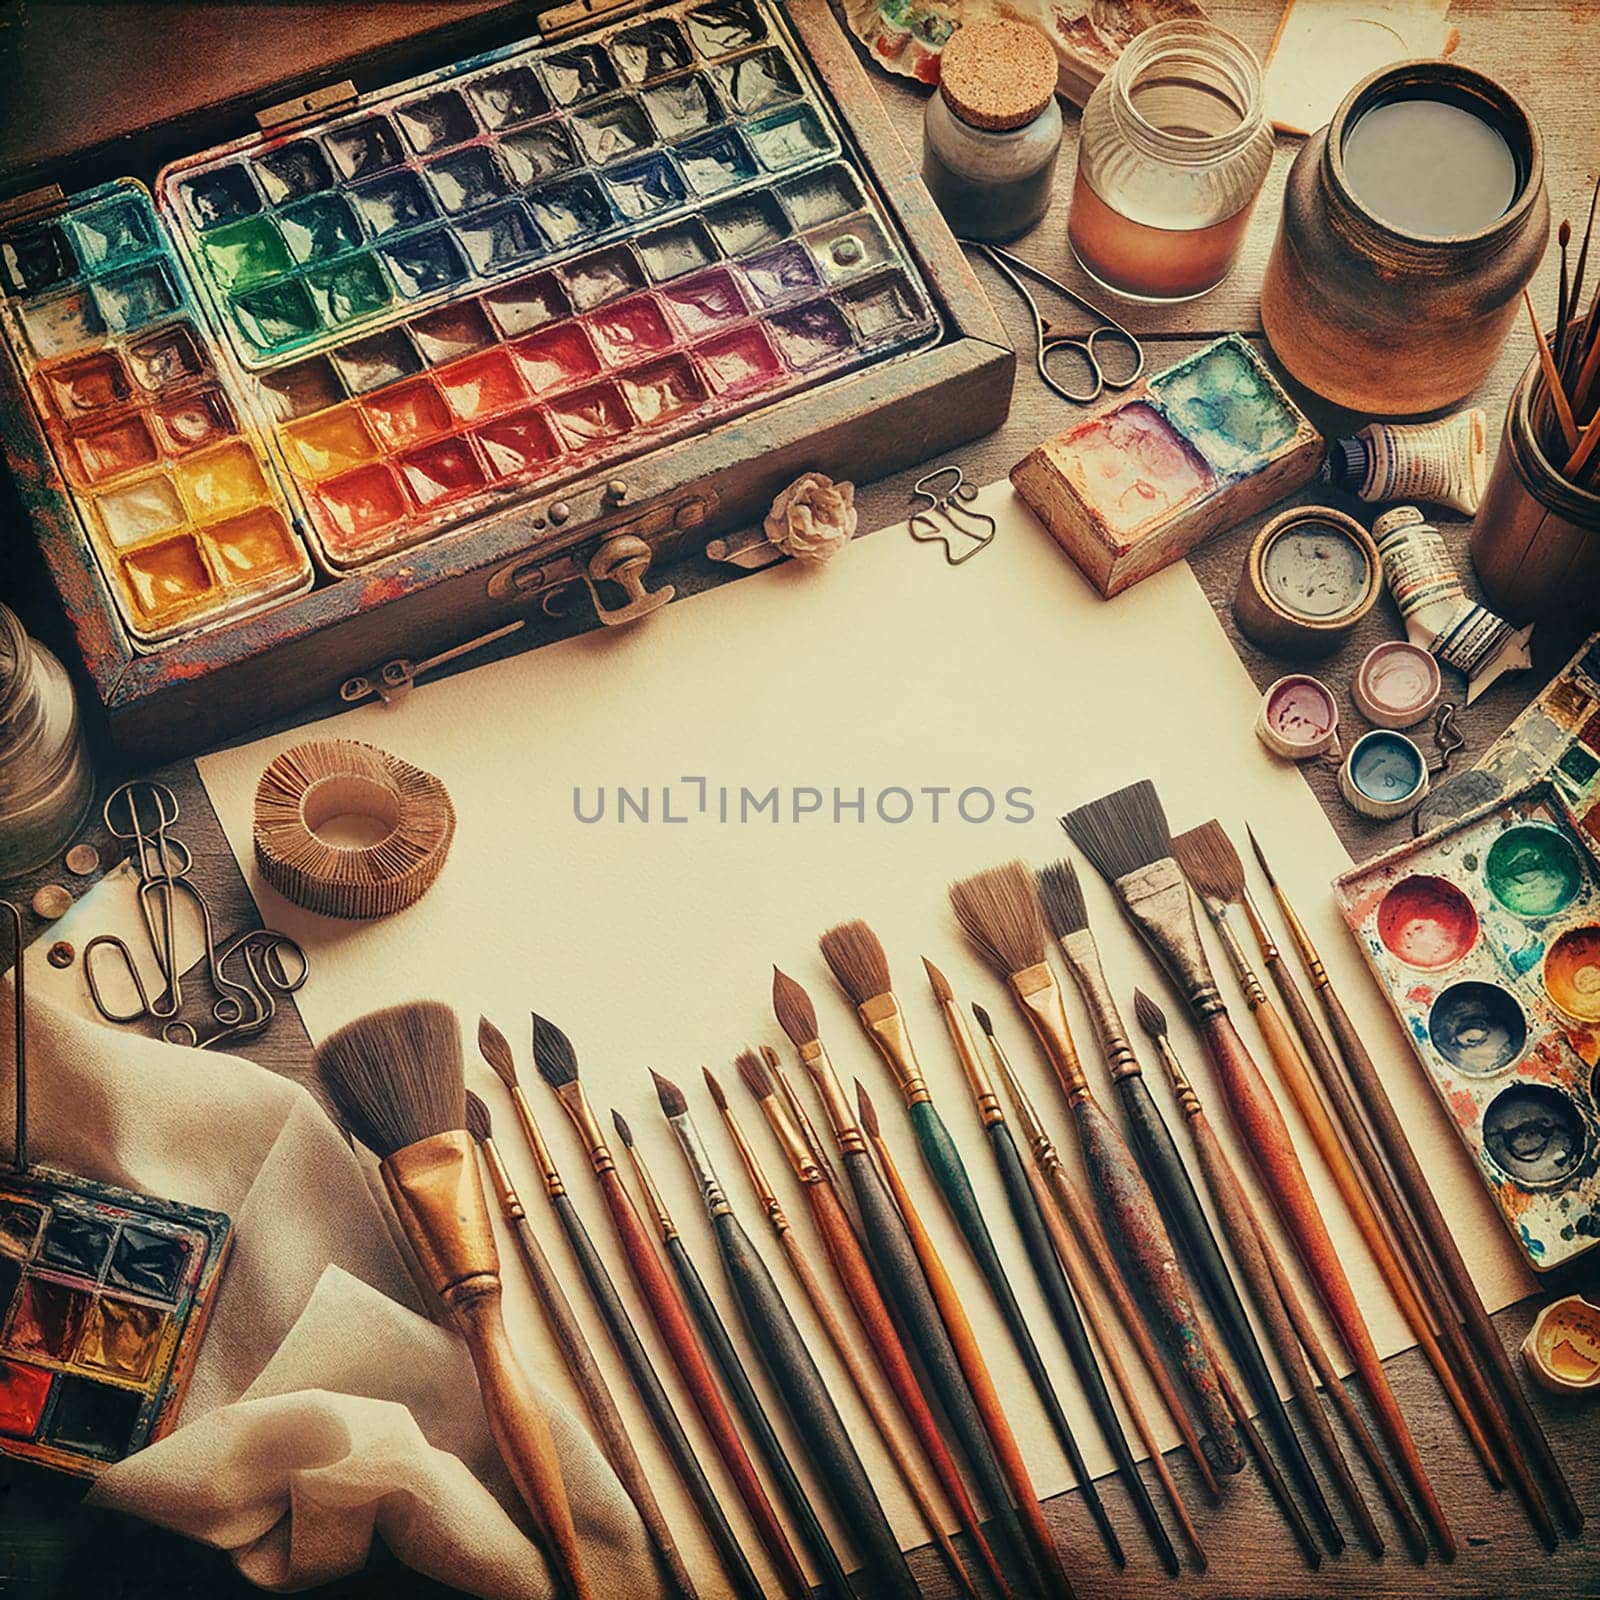 Vintage-Inspired Workspace: Artistic Mock-up with Watercolor Supplies